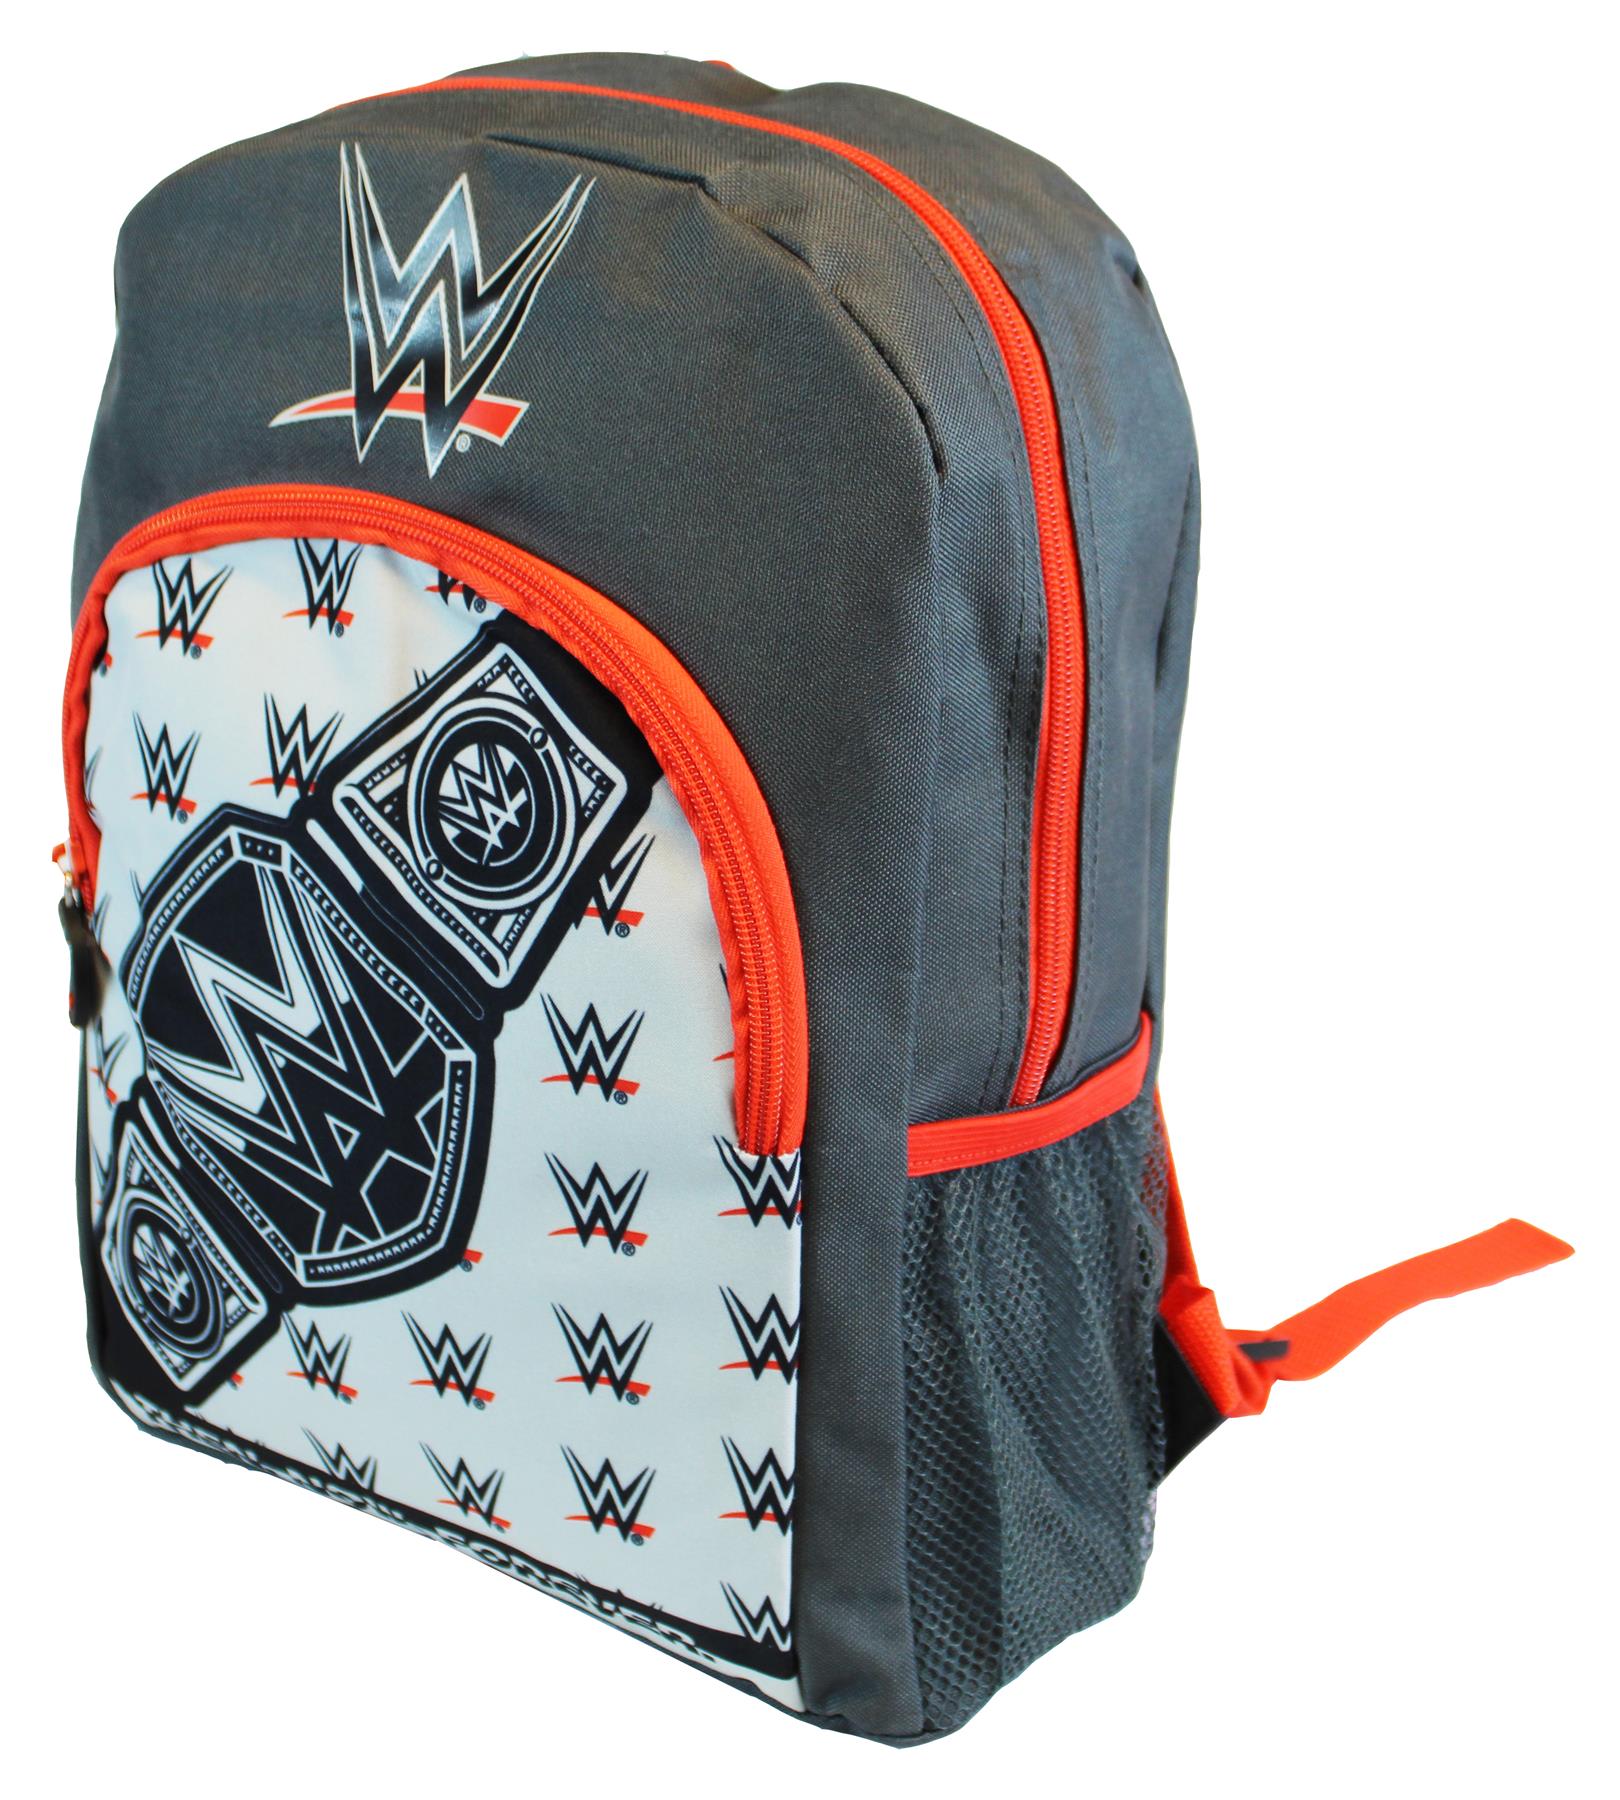 WWE Boys Champion Backpack One Size